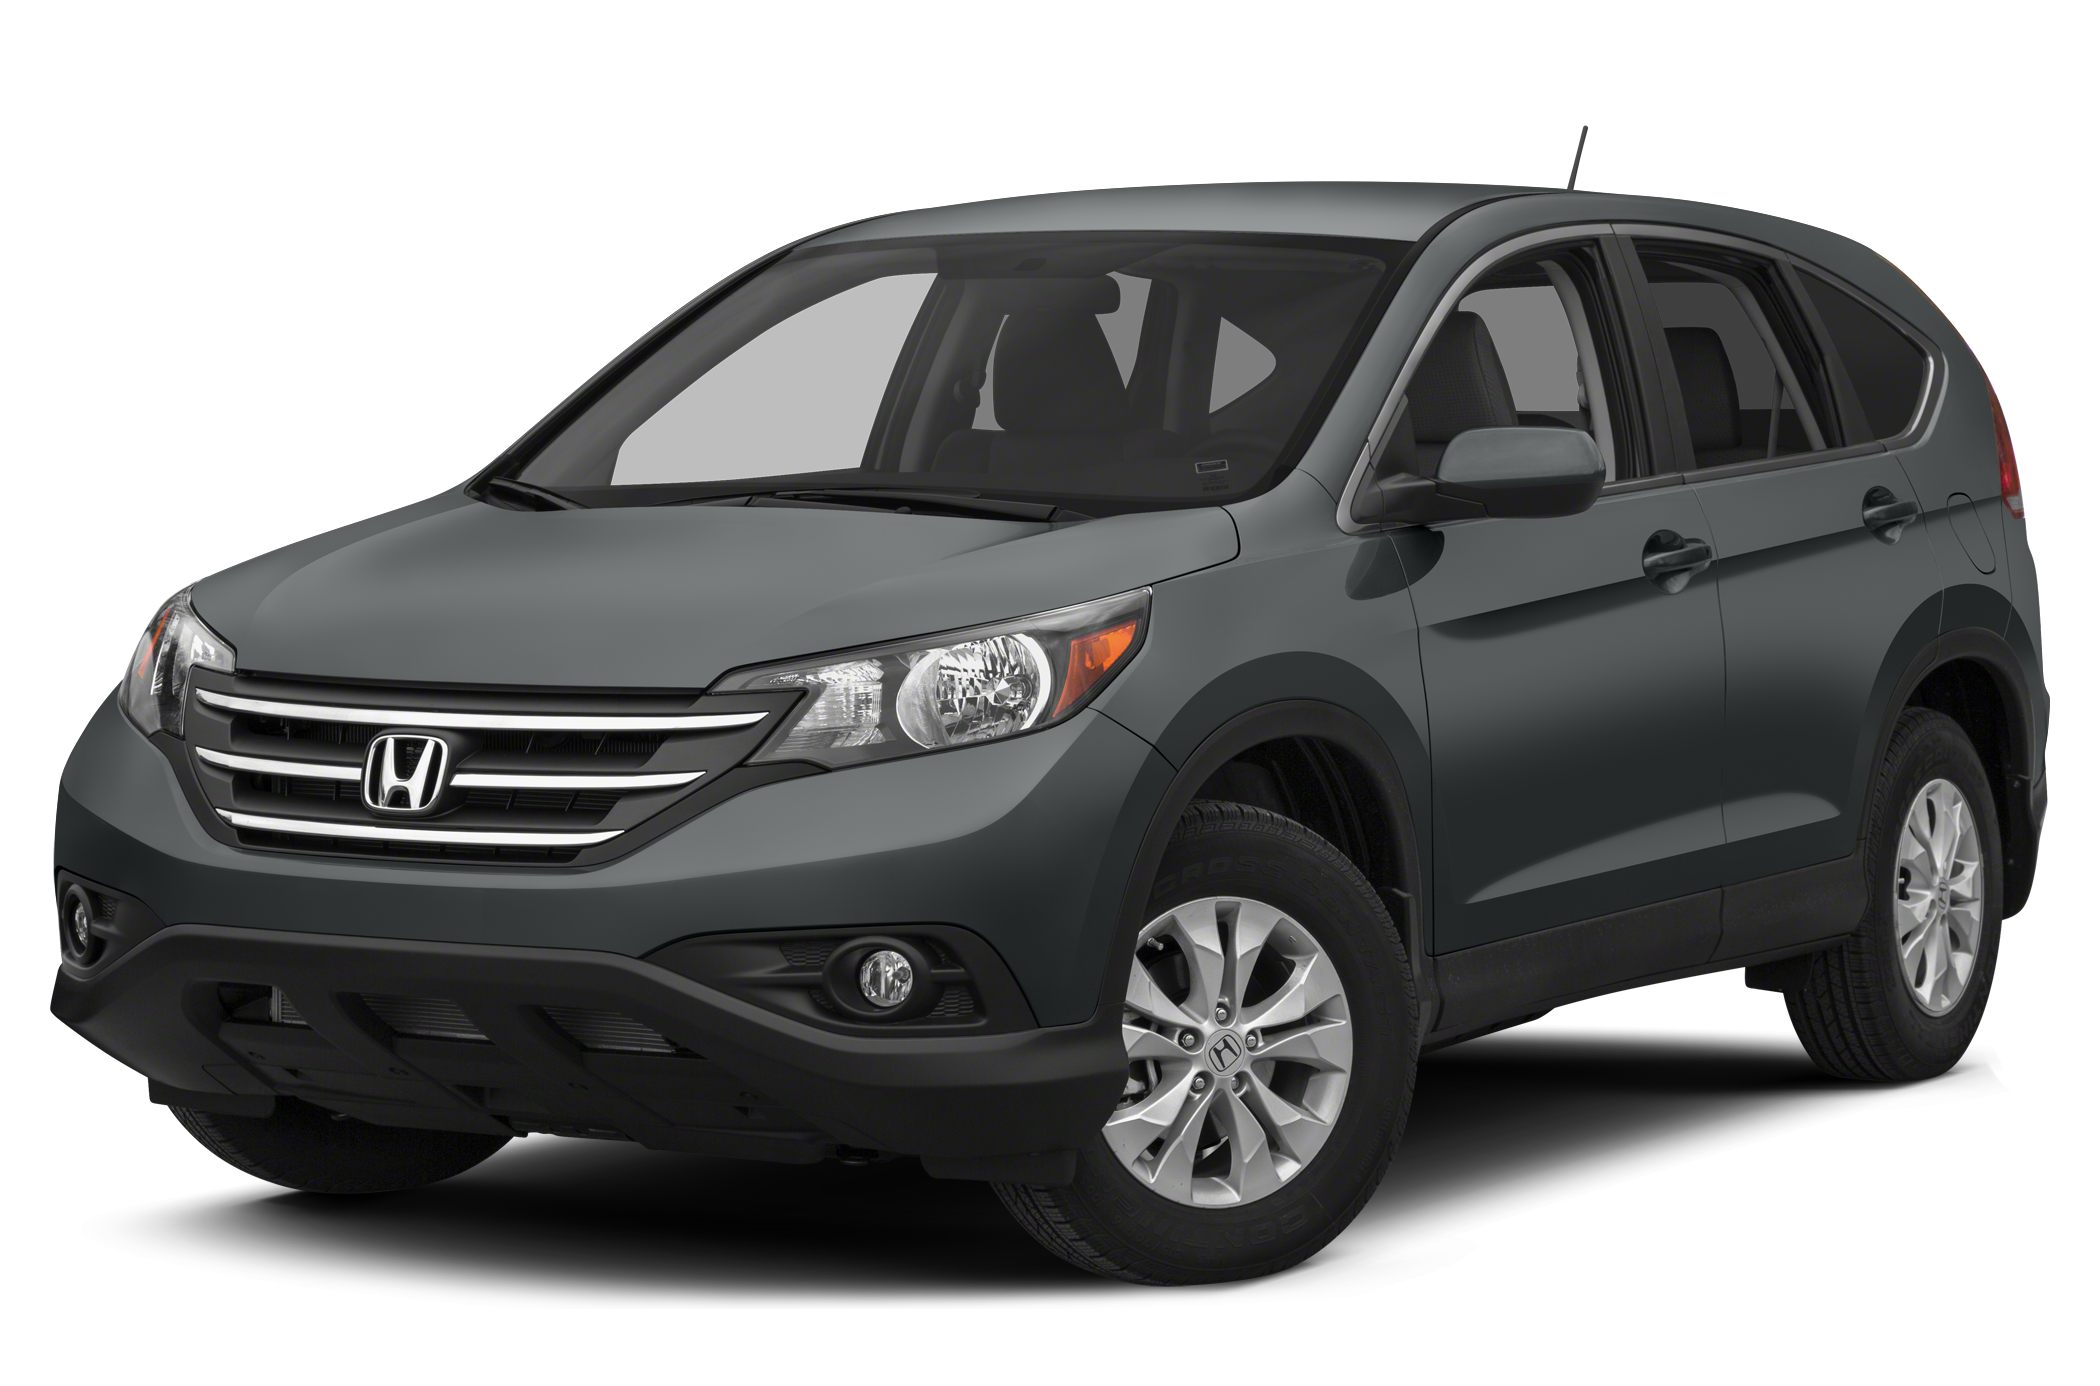 Honda cars for sale in springfield mo #5